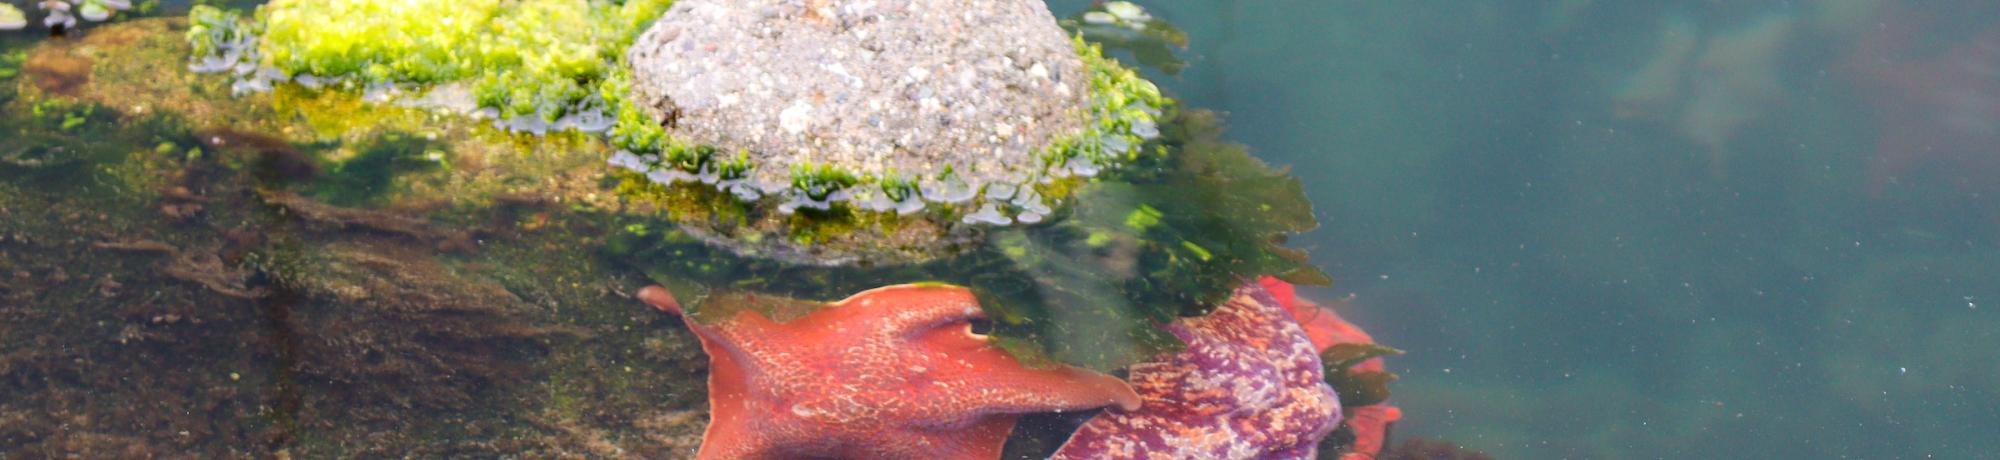 Three bright orange sea stars attached to a rock that is sticking slightly out of the water